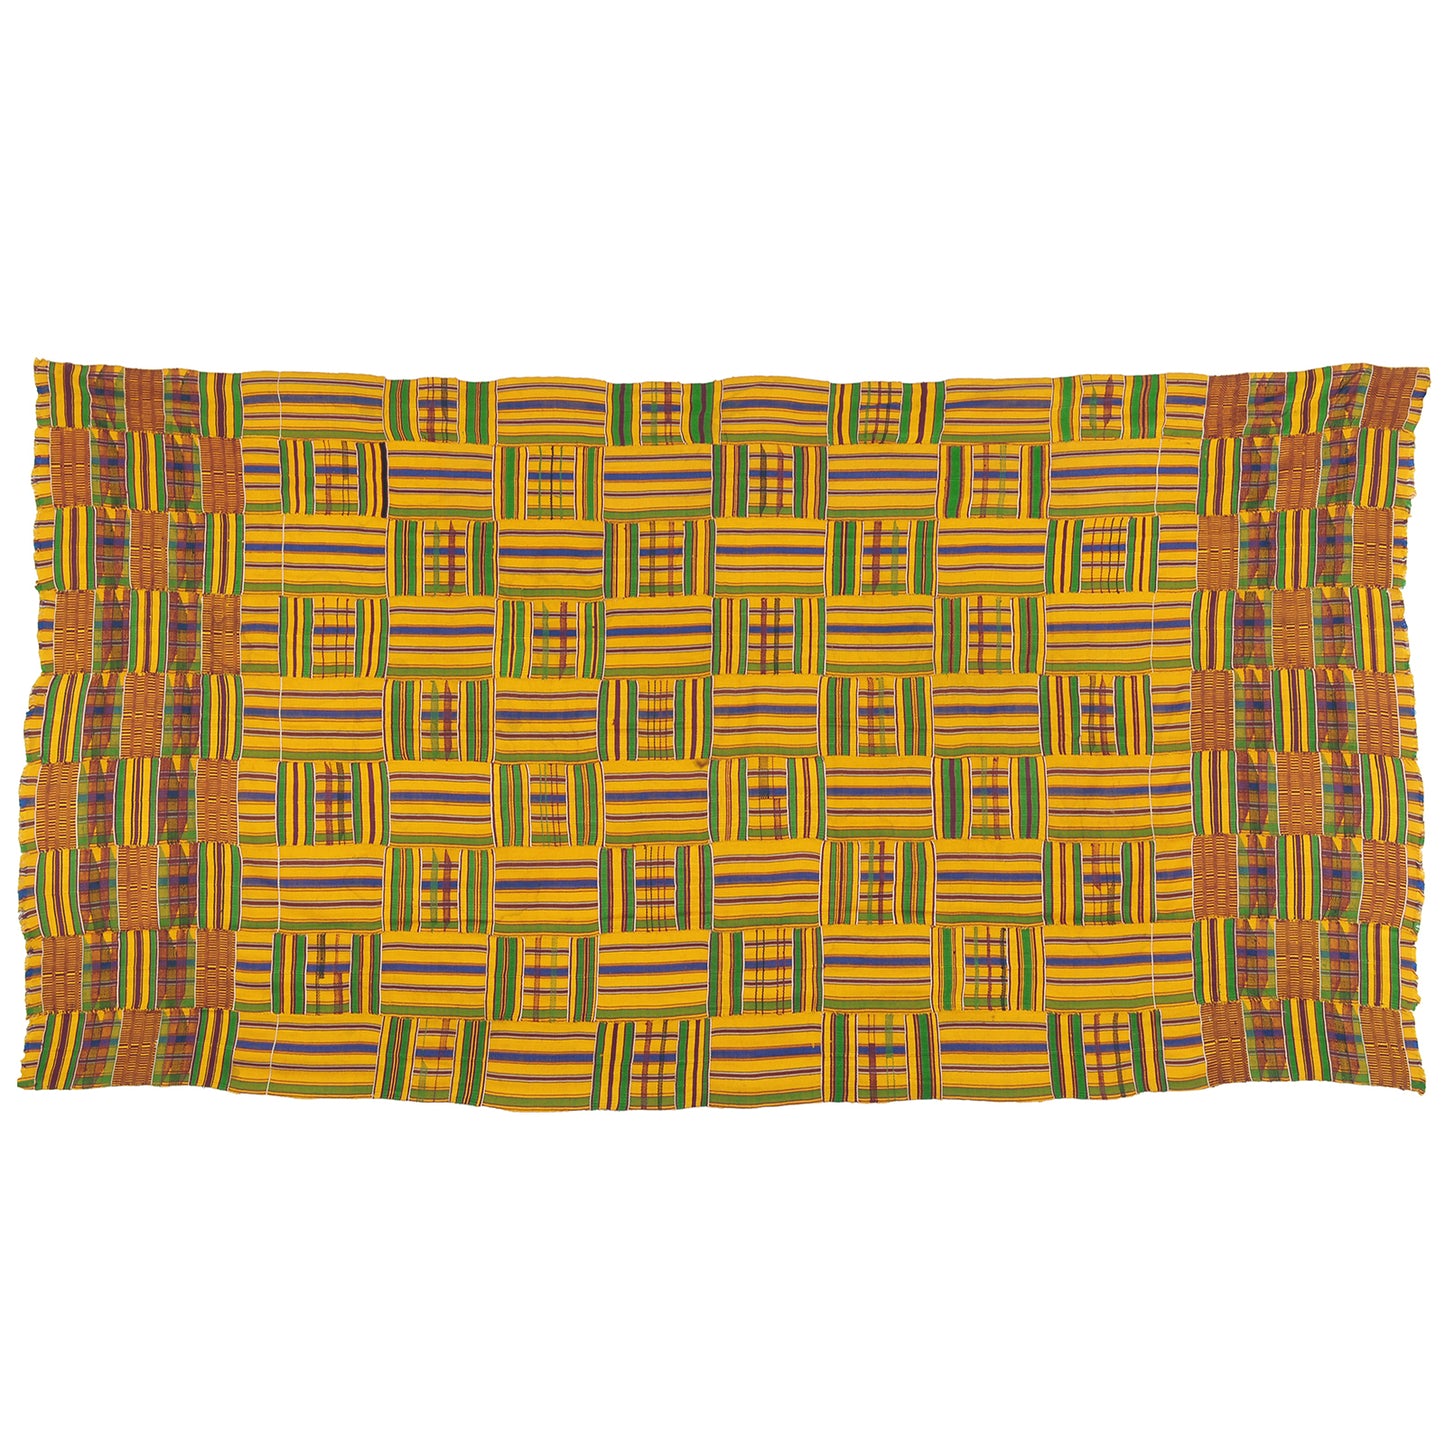 Authentic 1970s Ashanti Kente Cloth from Ghana - A Tapestry of Cultural Richness